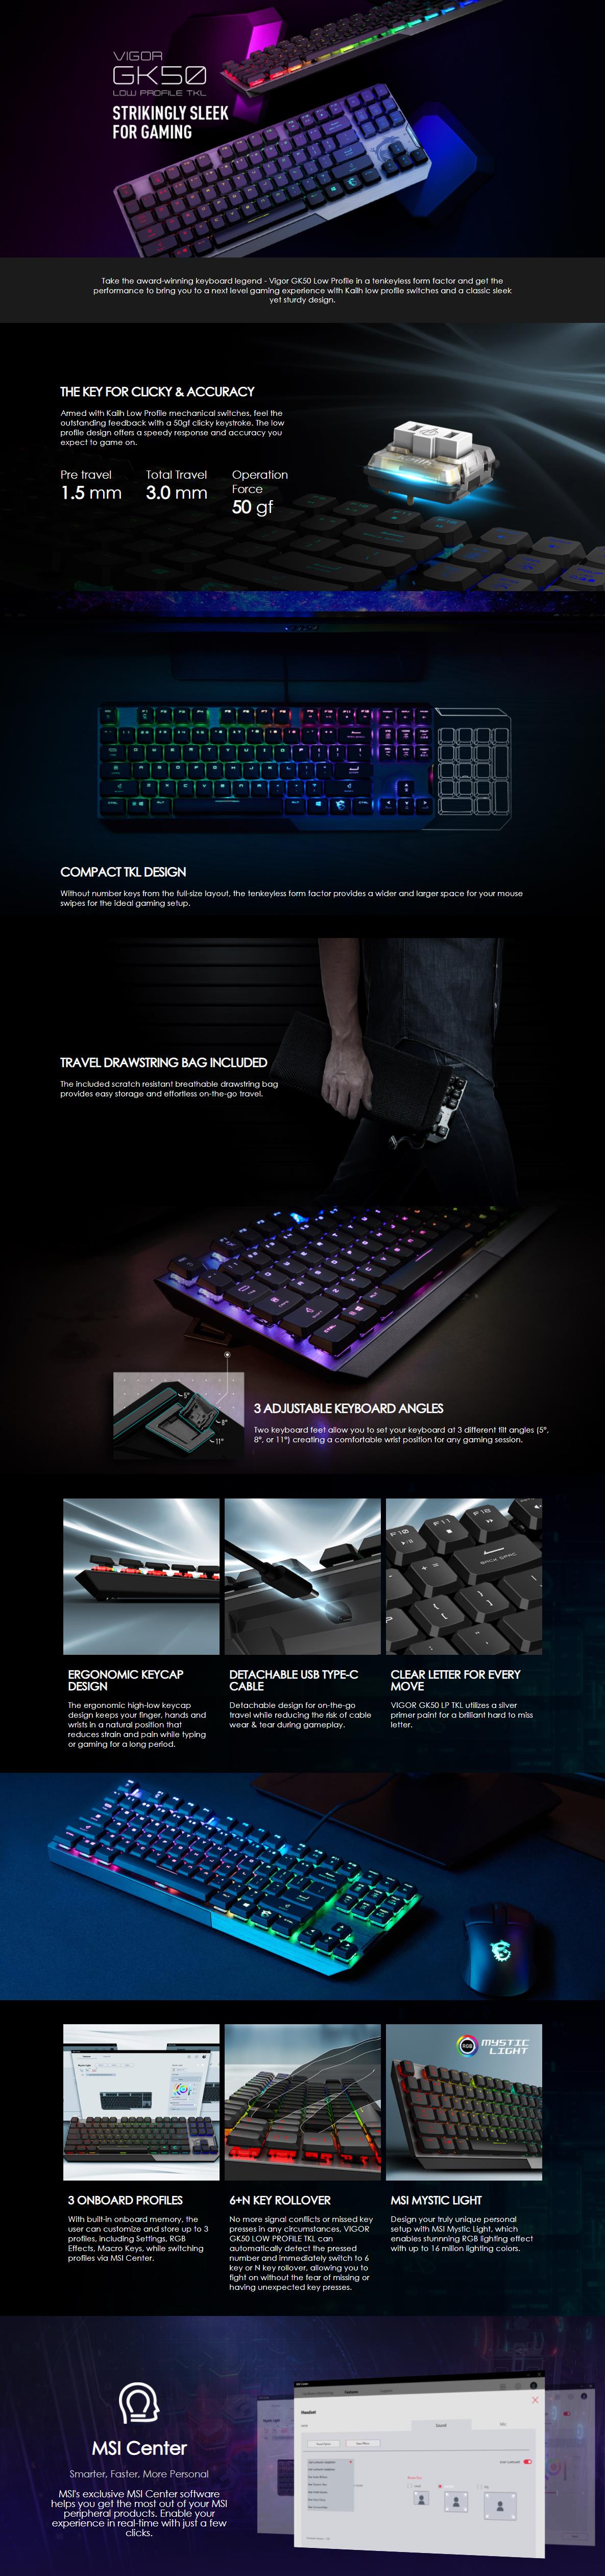 A large marketing image providing additional information about the product MSI Vigor GK50 Low Profile TKL RGB Gaming Keyboard - Additional alt info not provided